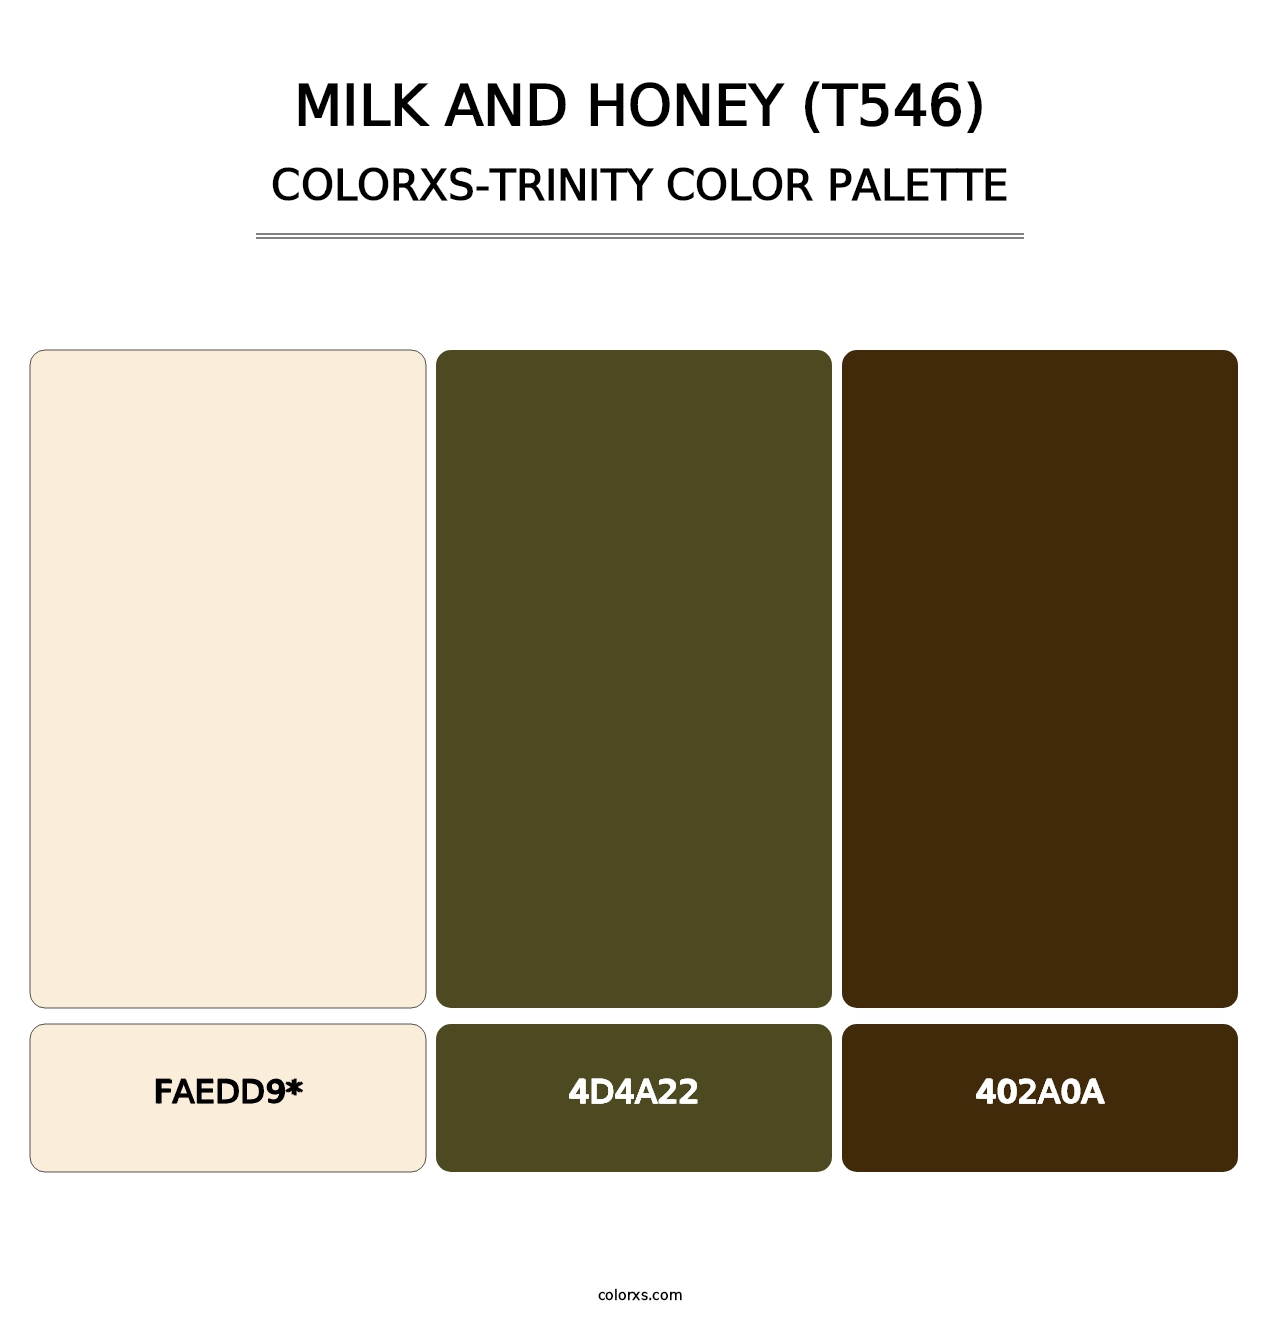 Milk and Honey (T546) - Colorxs Trinity Palette